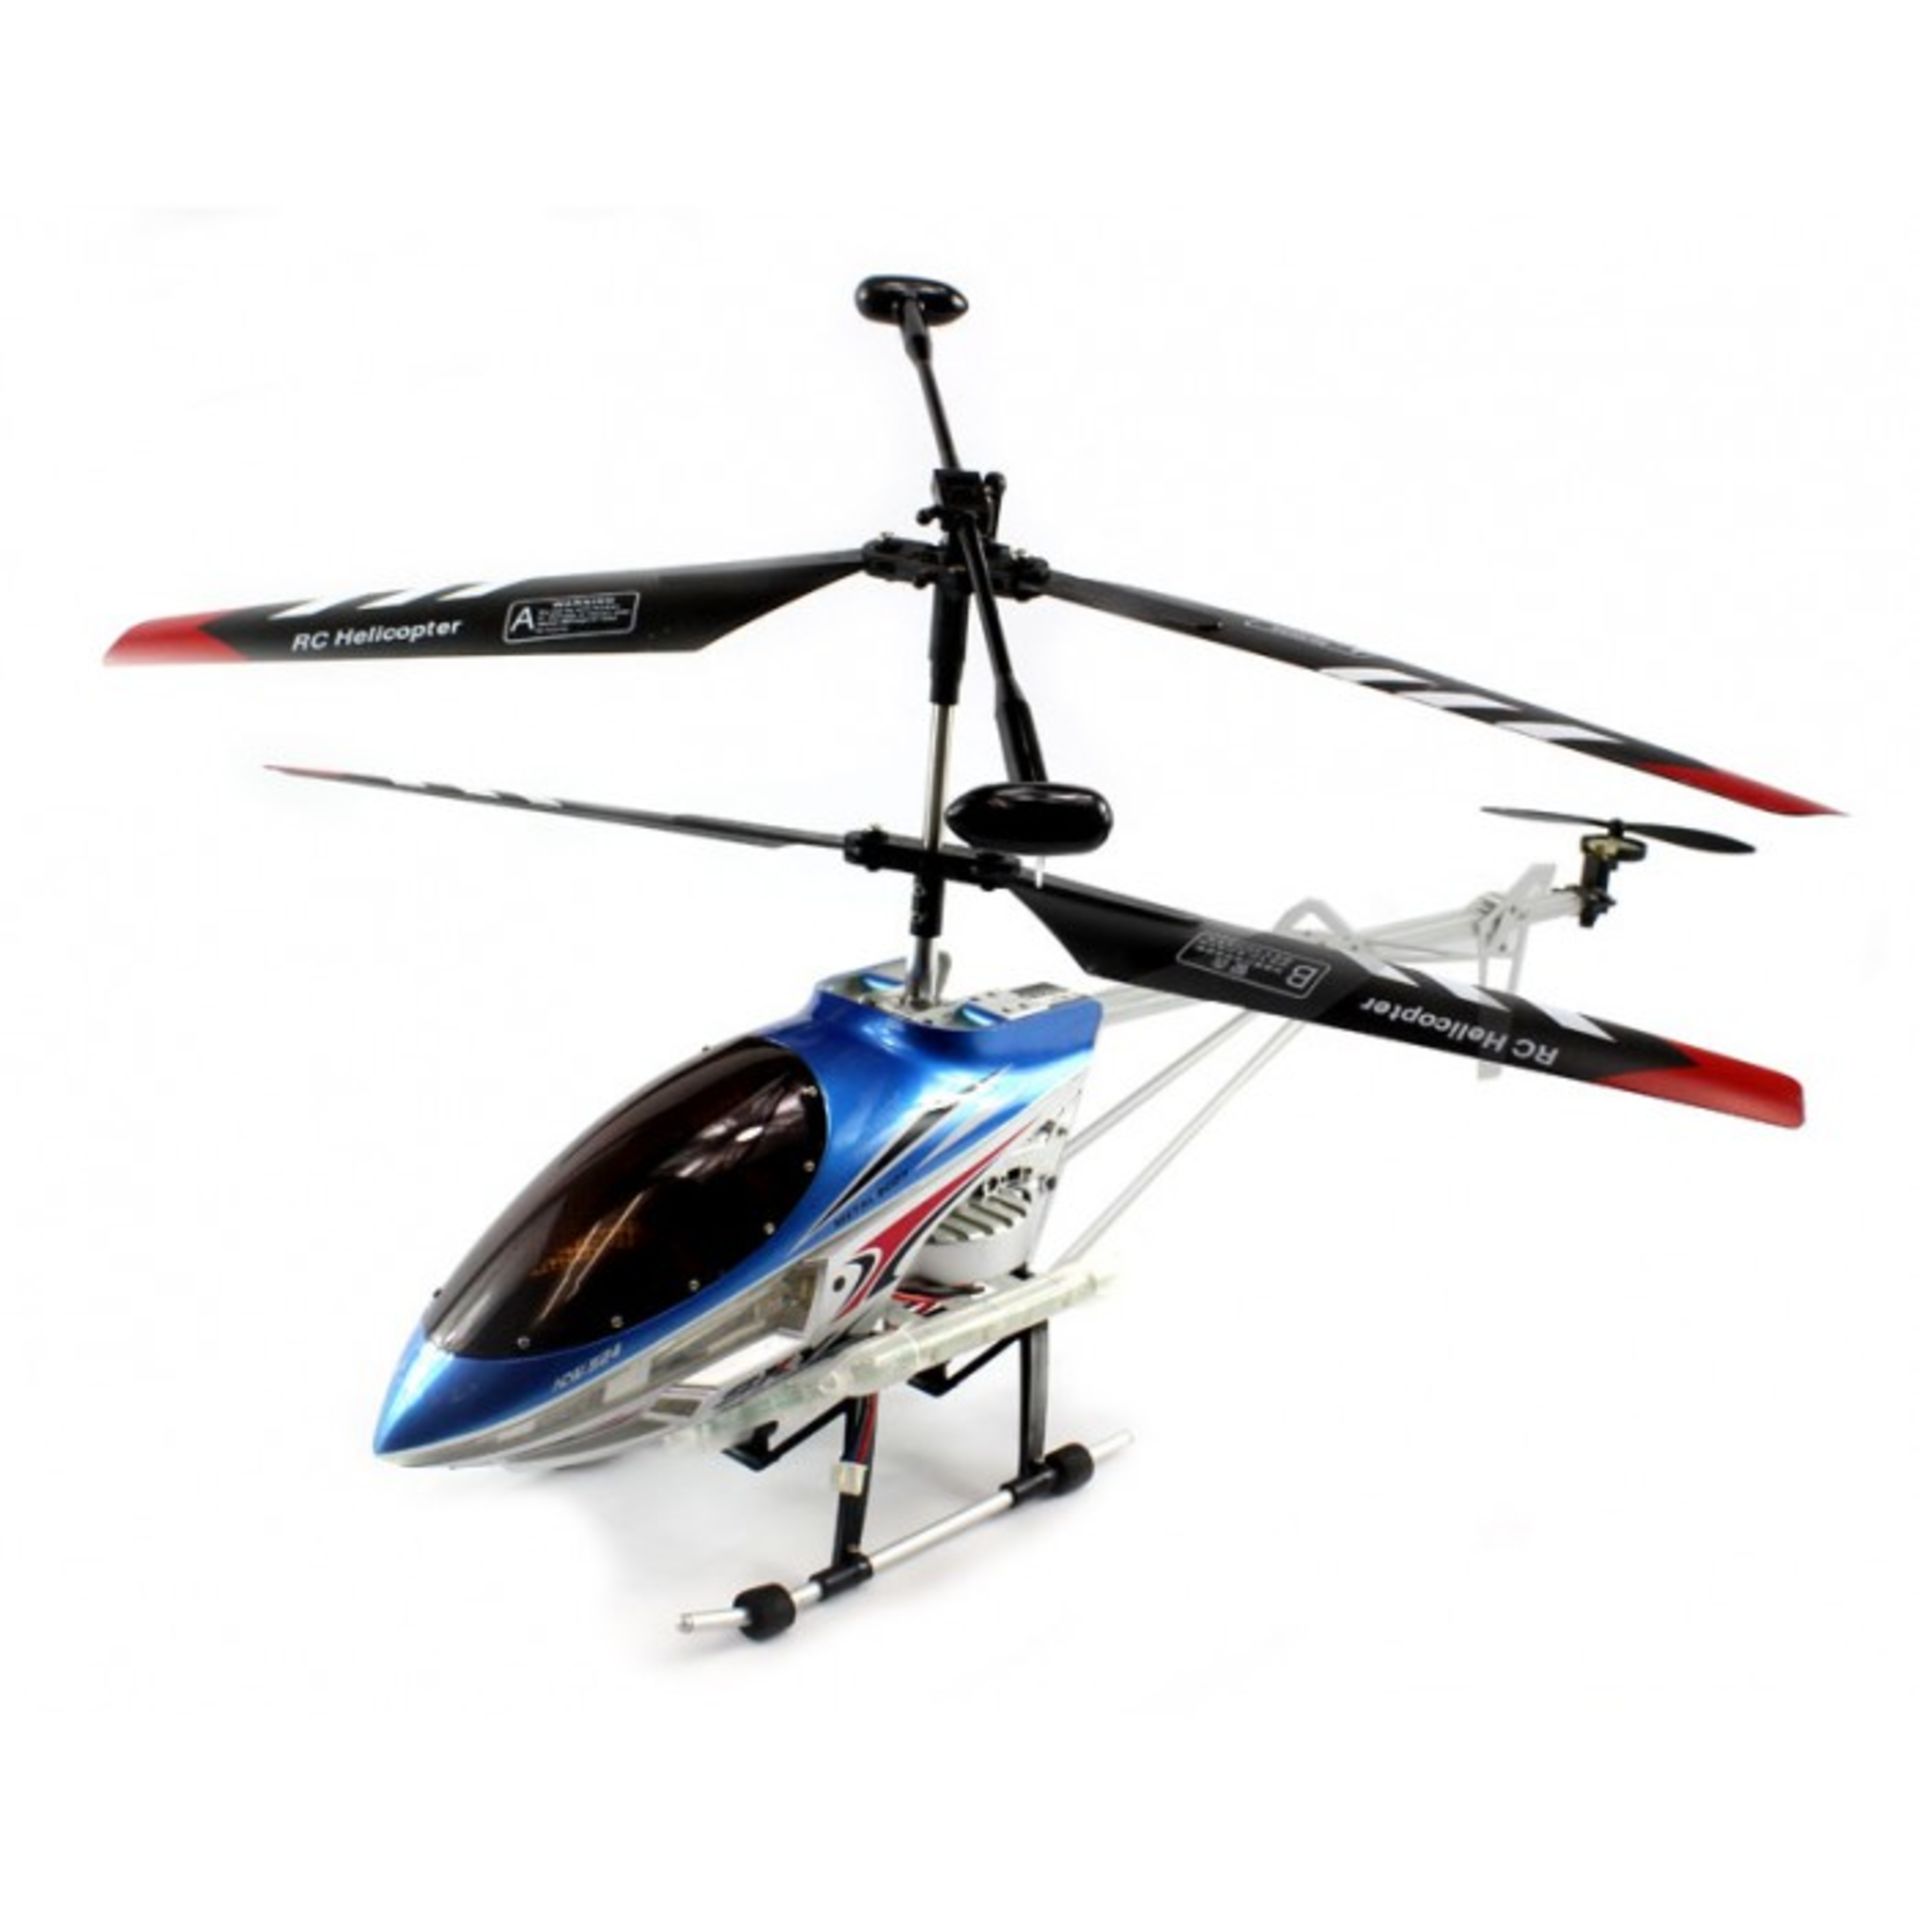 V Sky Lanneret Radio Control Helicopter3.5 Channels (very Large - Approx 70cms Long & 30 cms Tall)